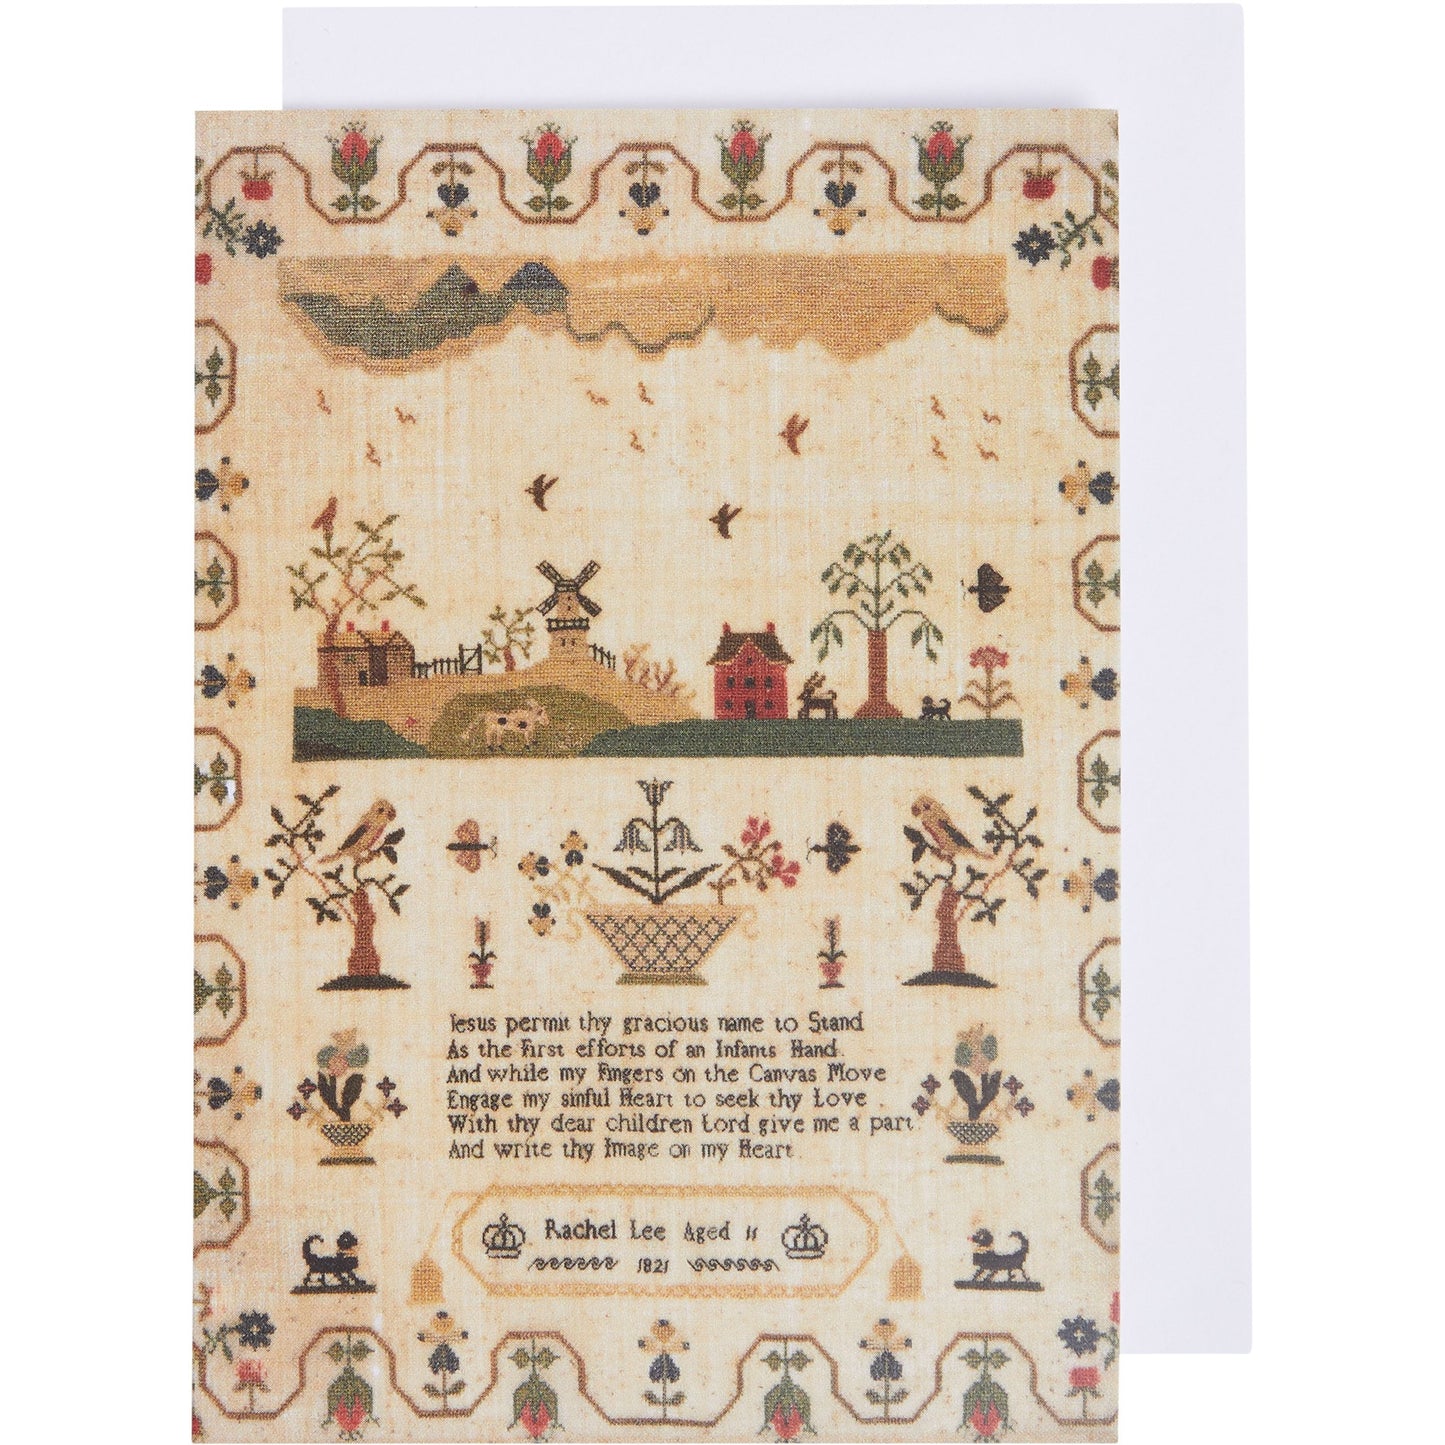 Notelet - Sampler with farm and windmill scene and framing border, by Rachel Lee. From the collection of The Fitzwilliam Museum.